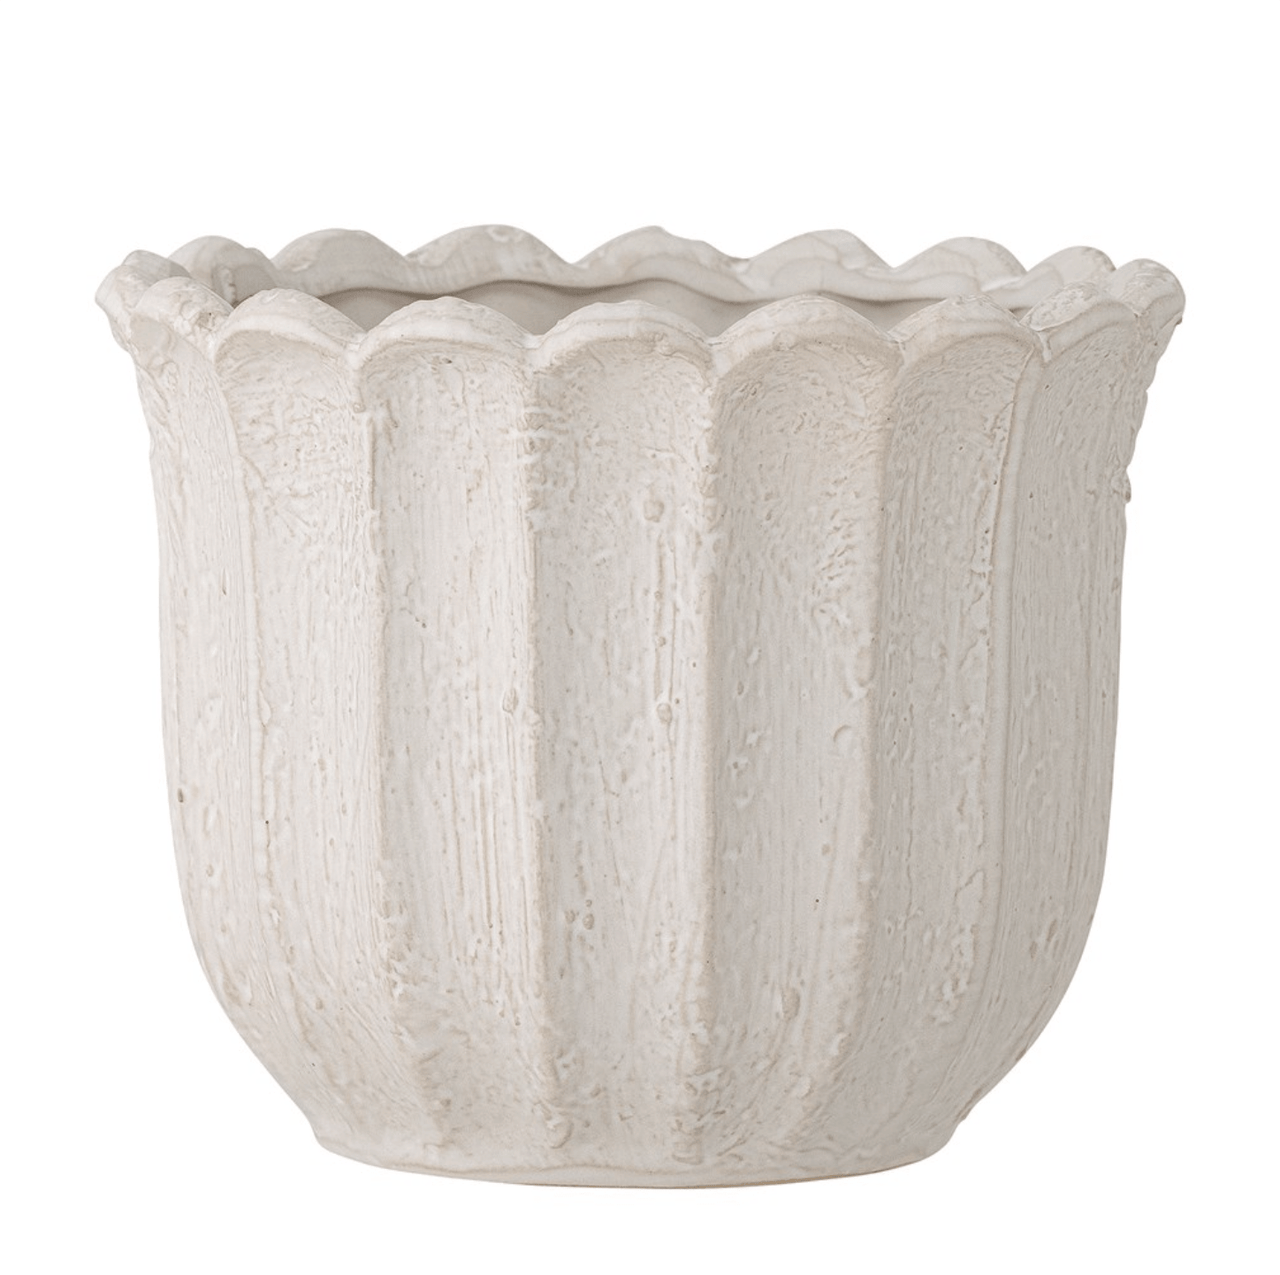 Chaca Flowerpot - White House of Dudley